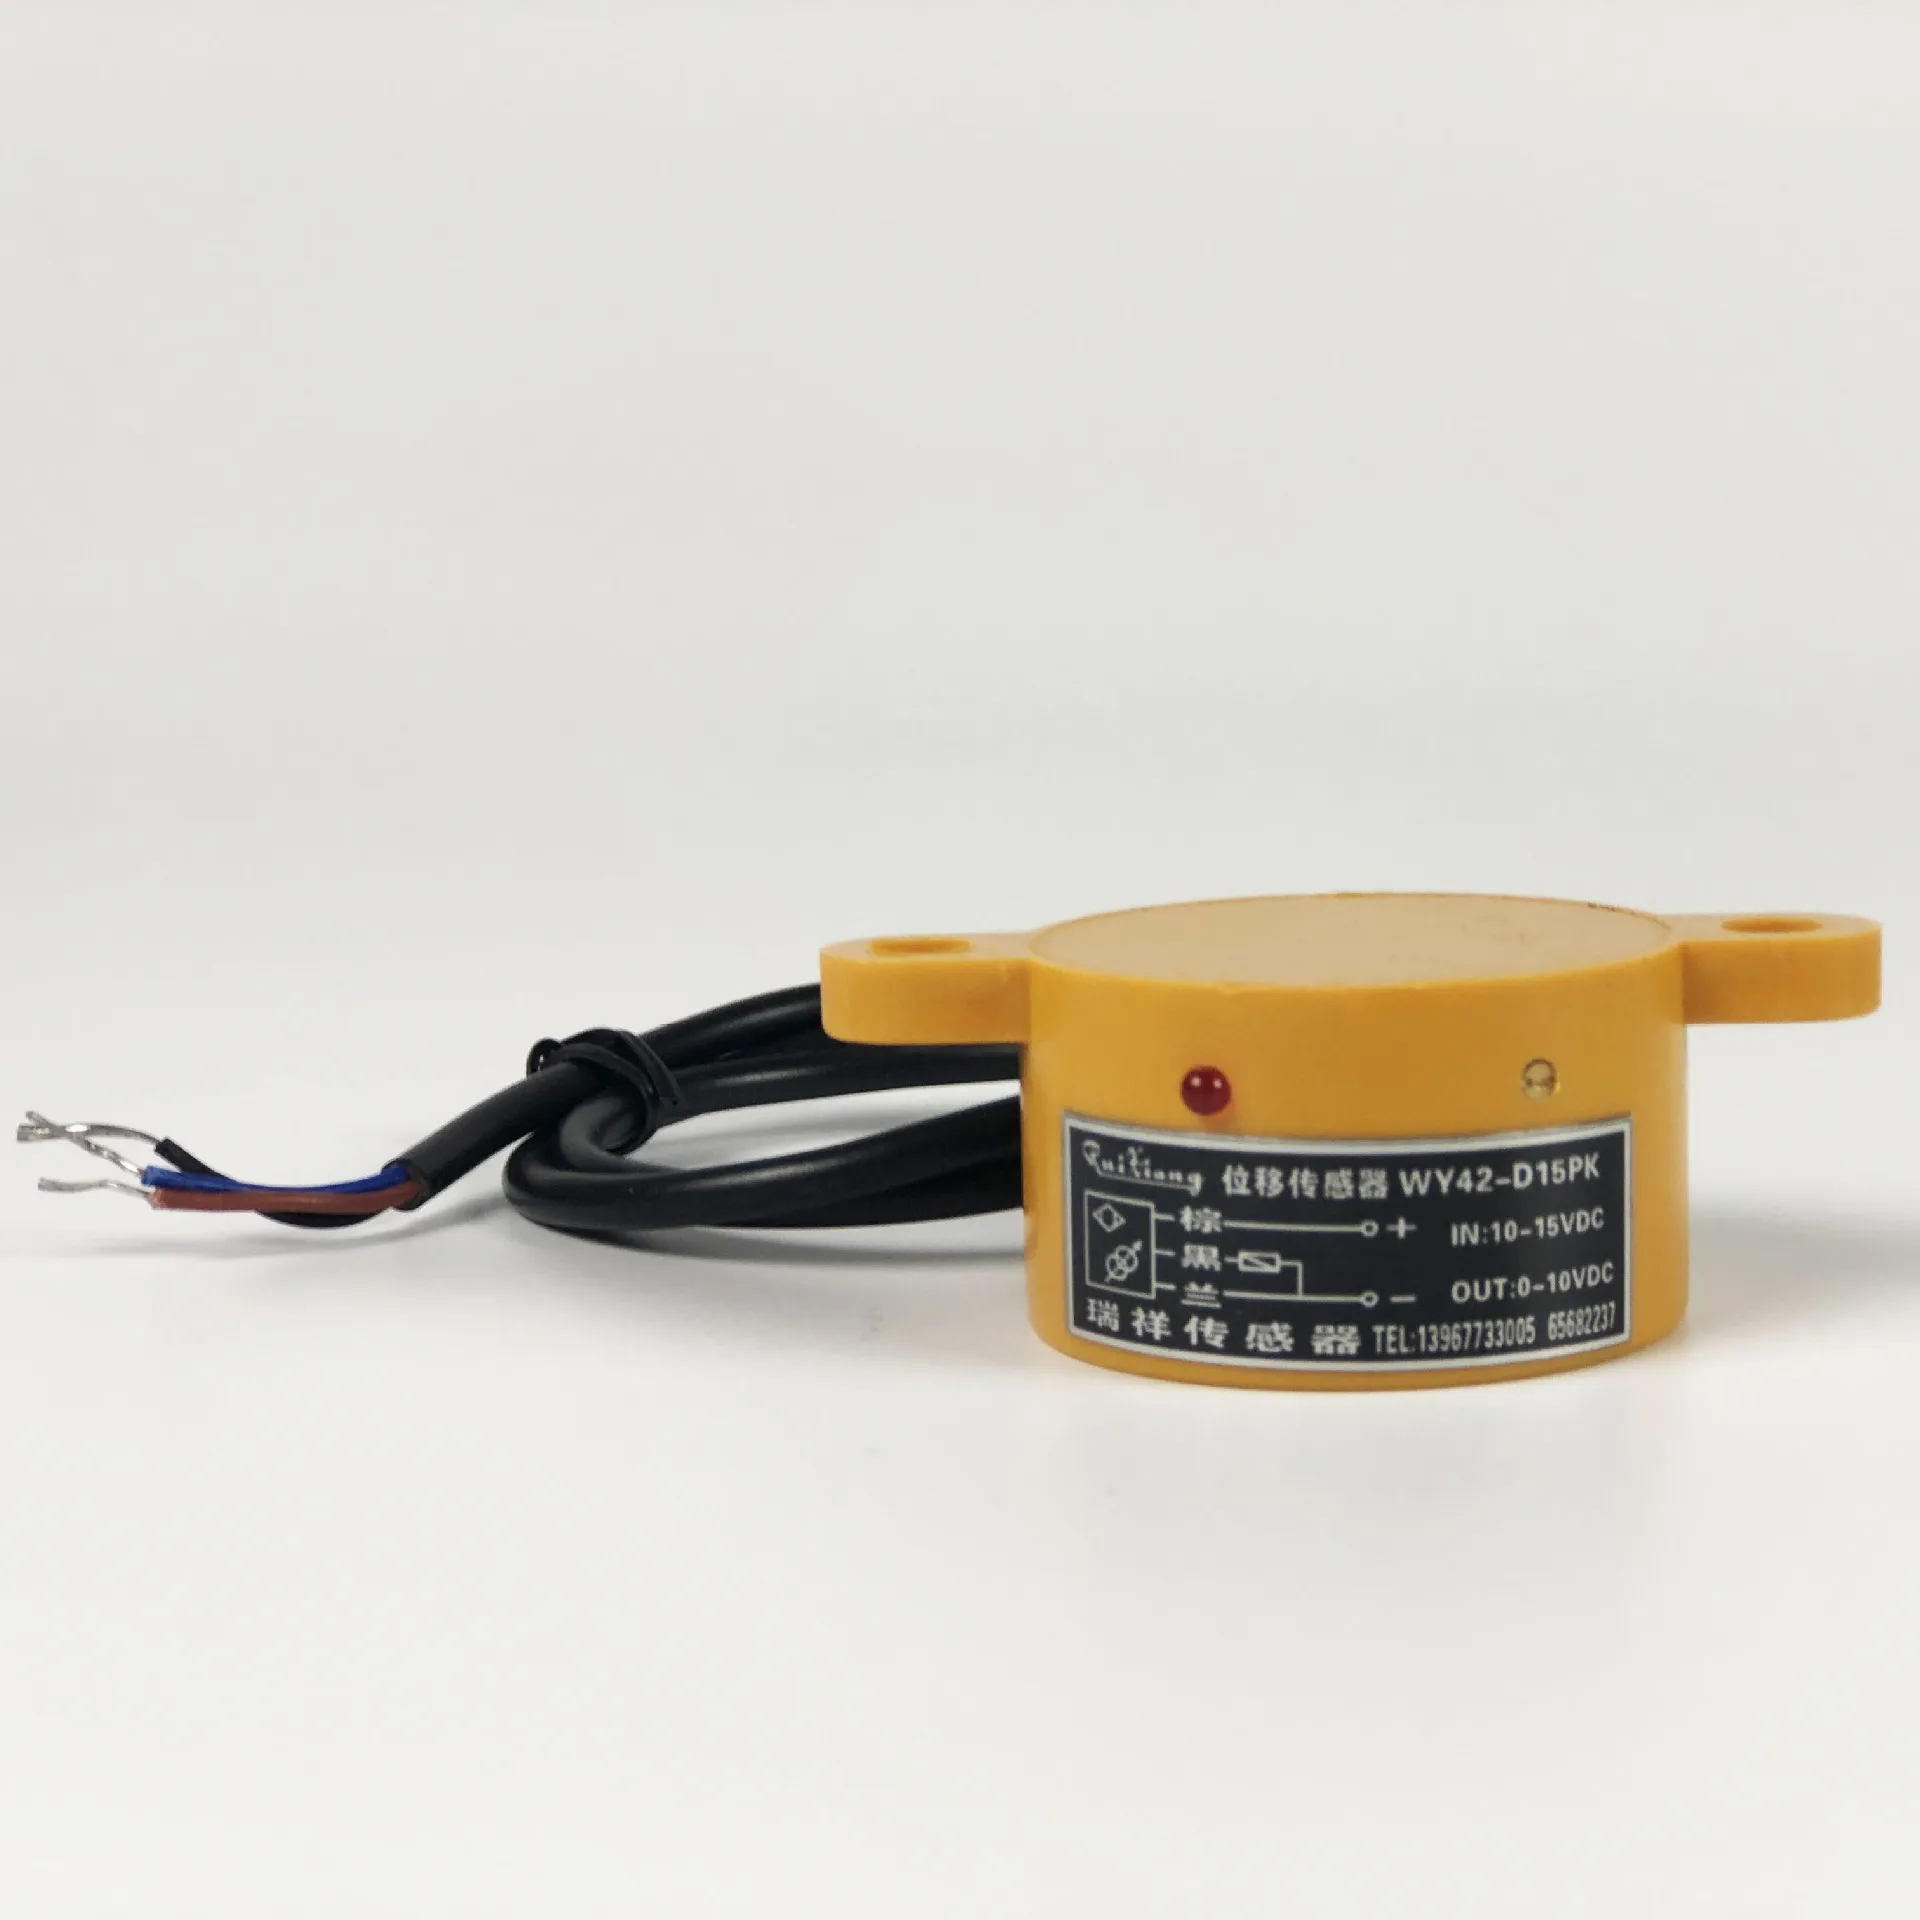 WY42-D15PK Yellow Displacement Sensor, Bag Making Machine and Other Feeding Displacement Switch Sensor